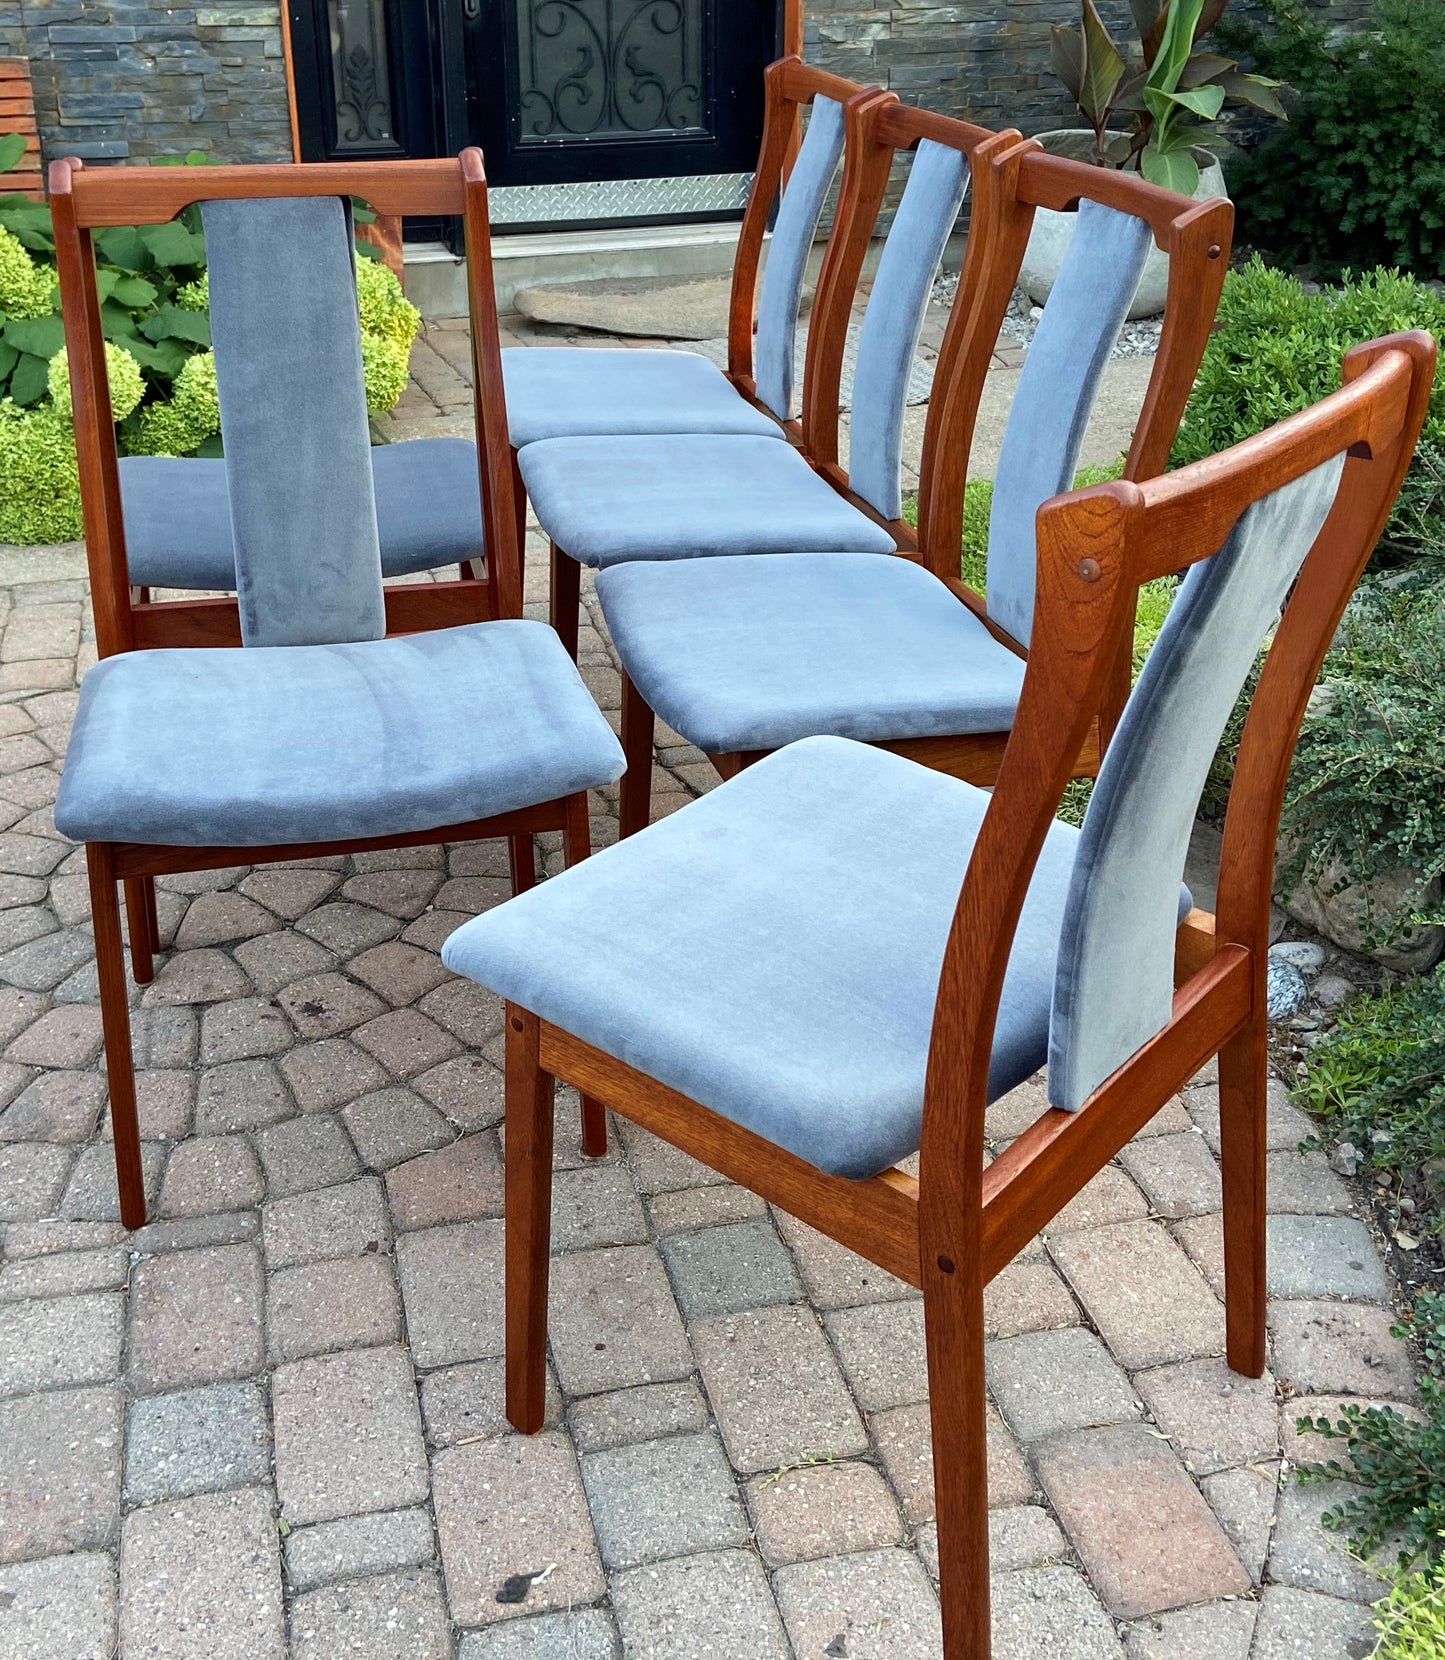 6 REFINISHED REUPHOLSTERED Danish Mid Century Modern Teak Chairs by VS, PERFECT